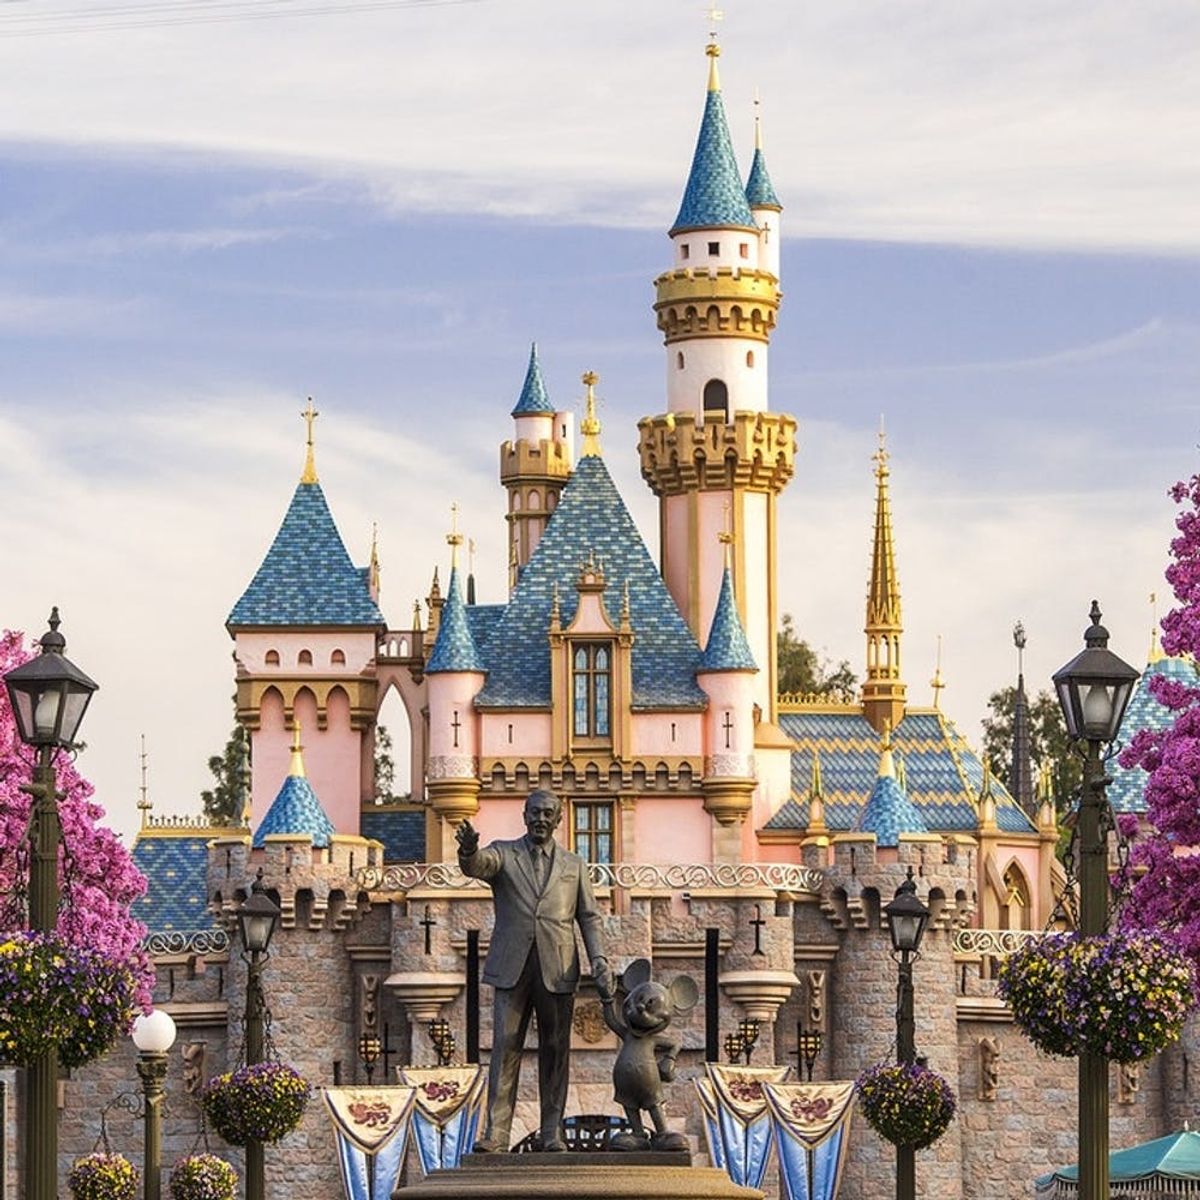 8 Unofficial Fan Days at Disneyland Worth Checking Out